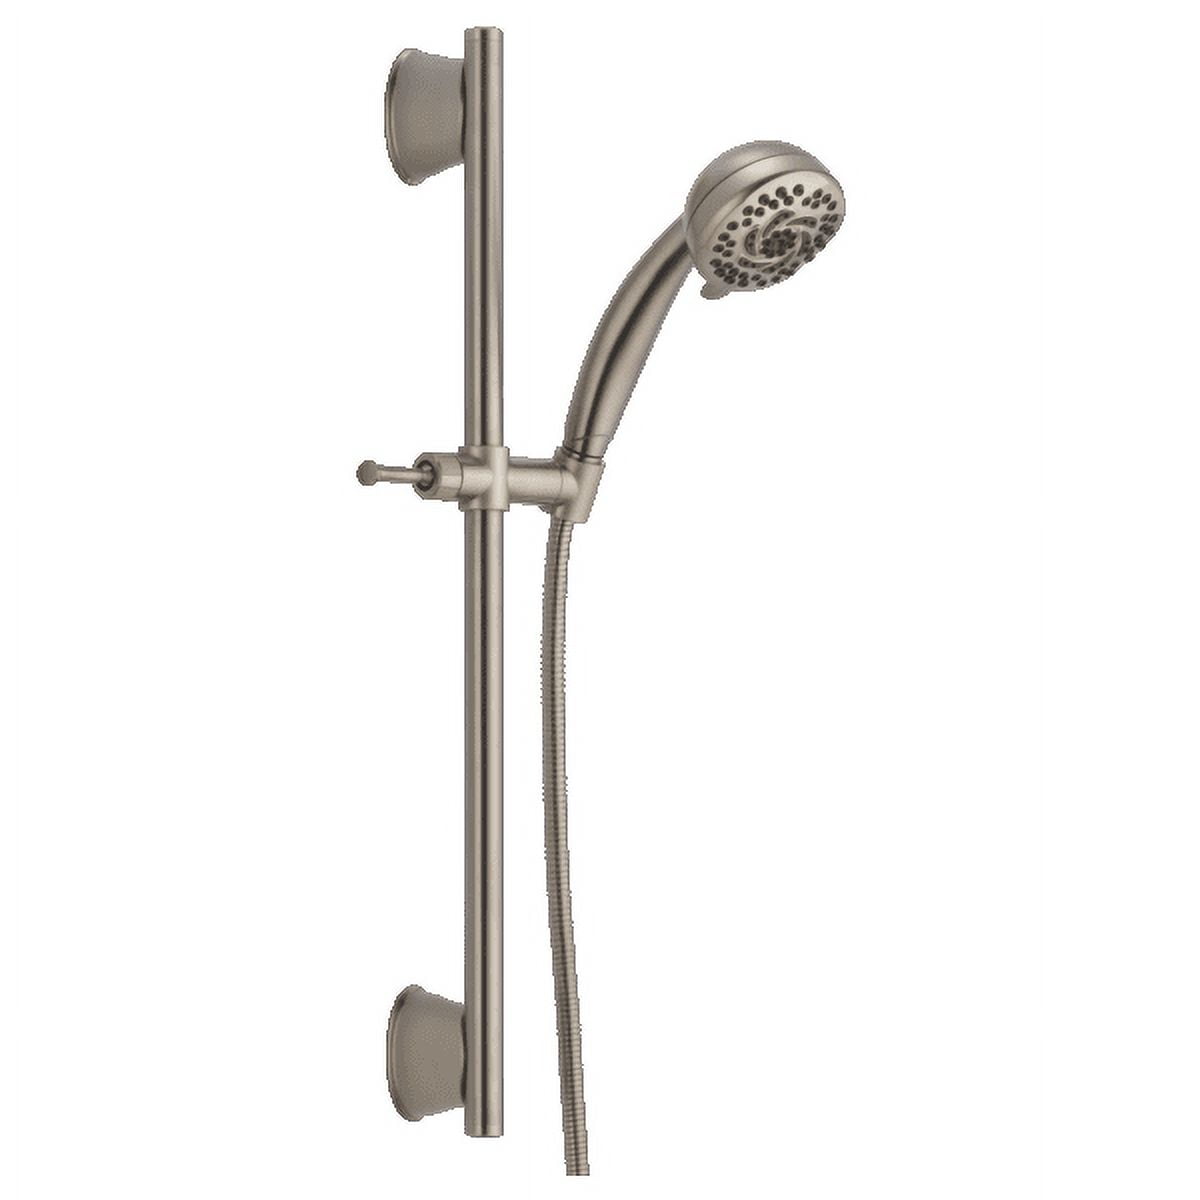 51599-ssds Brilliance Stainless Universal Touch Clean Slide Bar With Multi Function Handshower